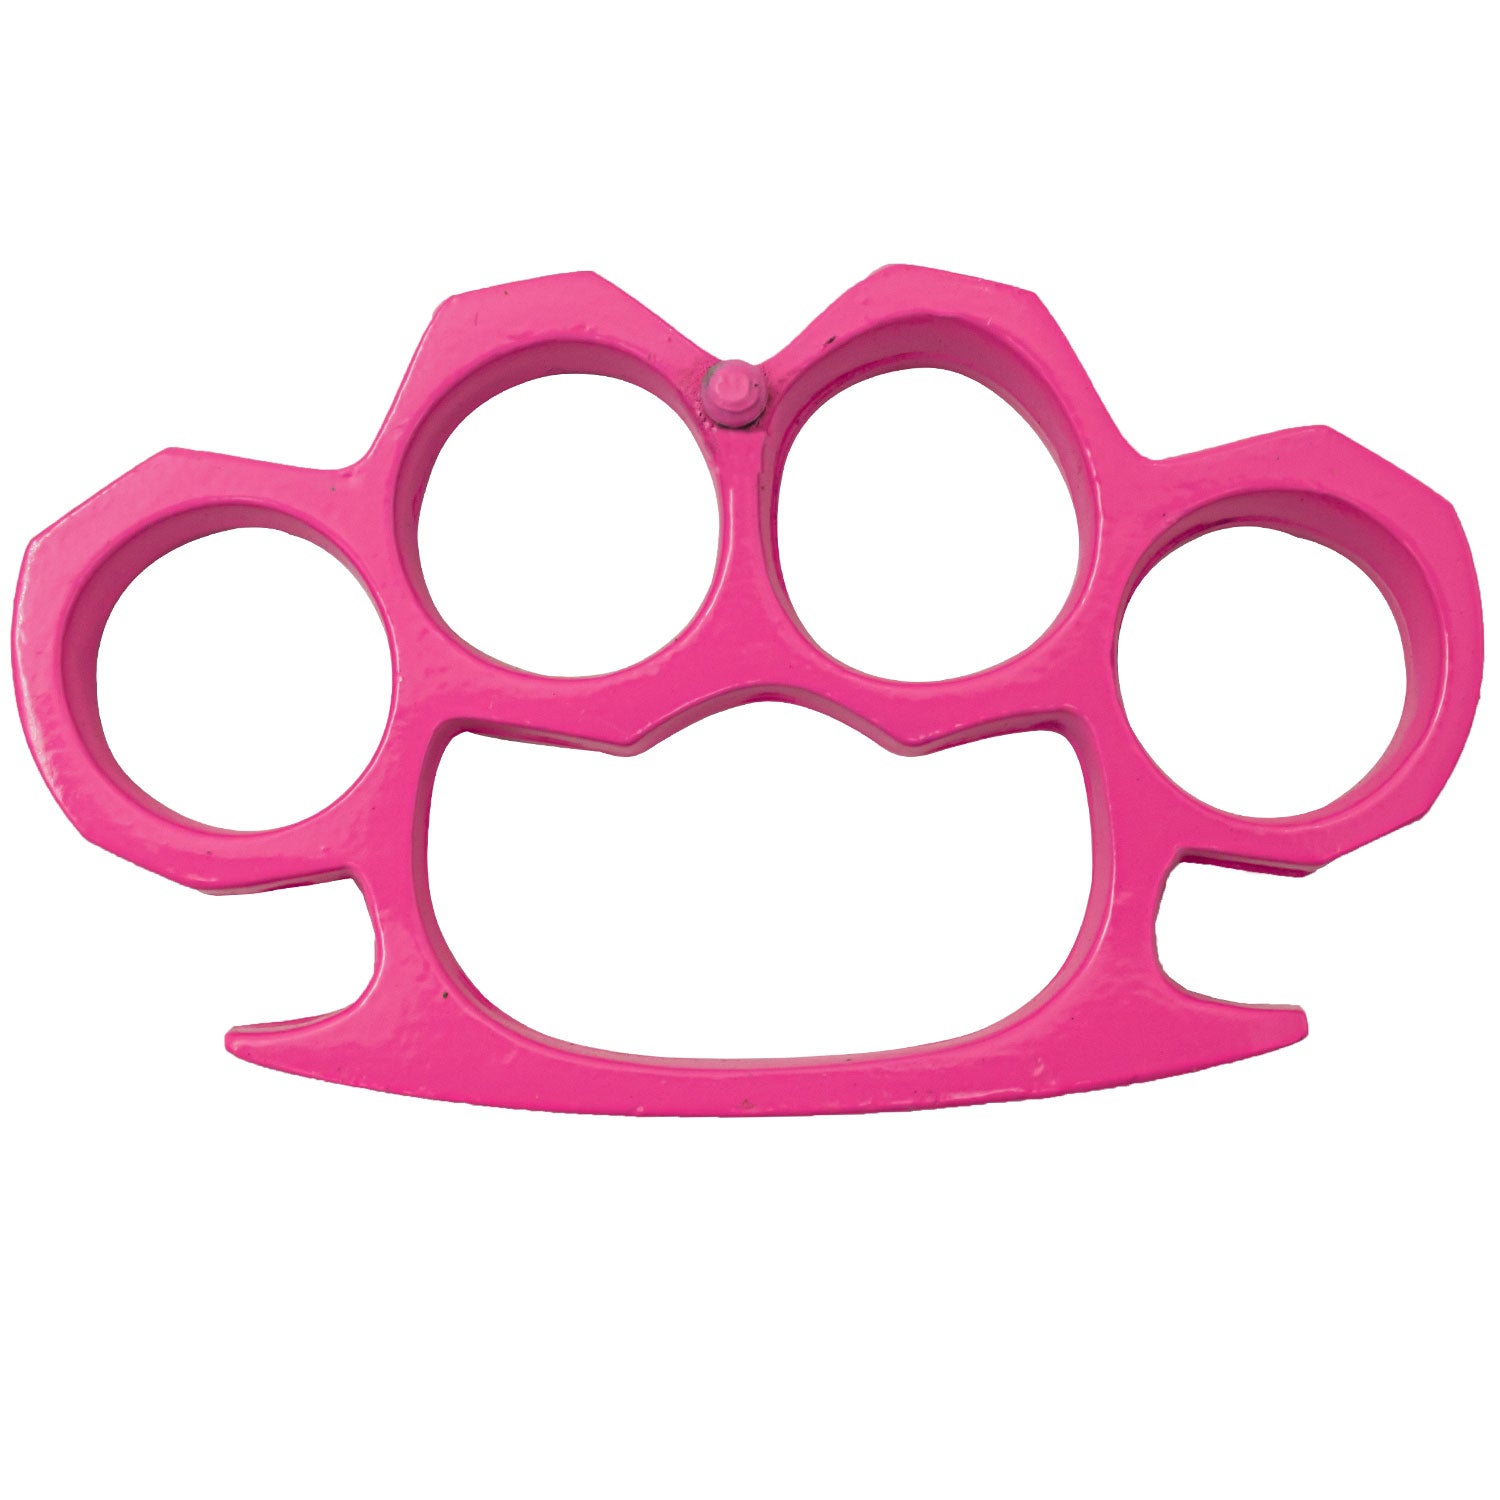 4 Inch Long Steel Knuckle Belt Buckle Pink – Panther Wholesale